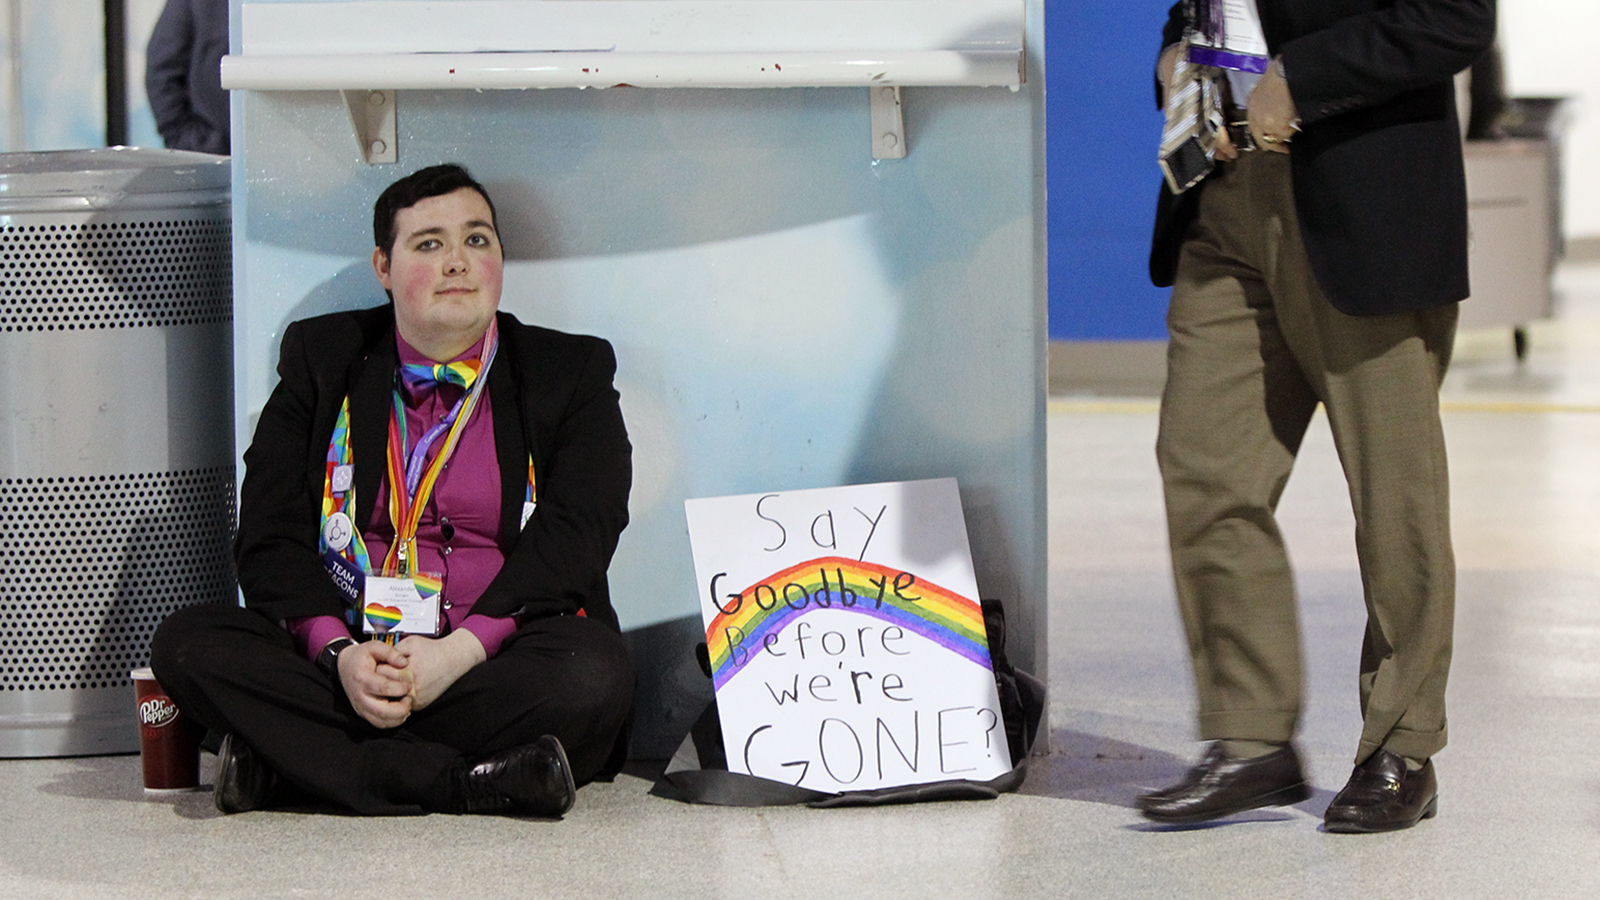 Alexander Dungan, of Garrett-Evangelical Theological Seminary near Chicago, sits near an exit of the America’s Center following a vote to adopt the Traditional Plan at the UMC General Conference in St. Louis, Mo., on Feb. 26, 2019. RNS photo by Kit Doyle